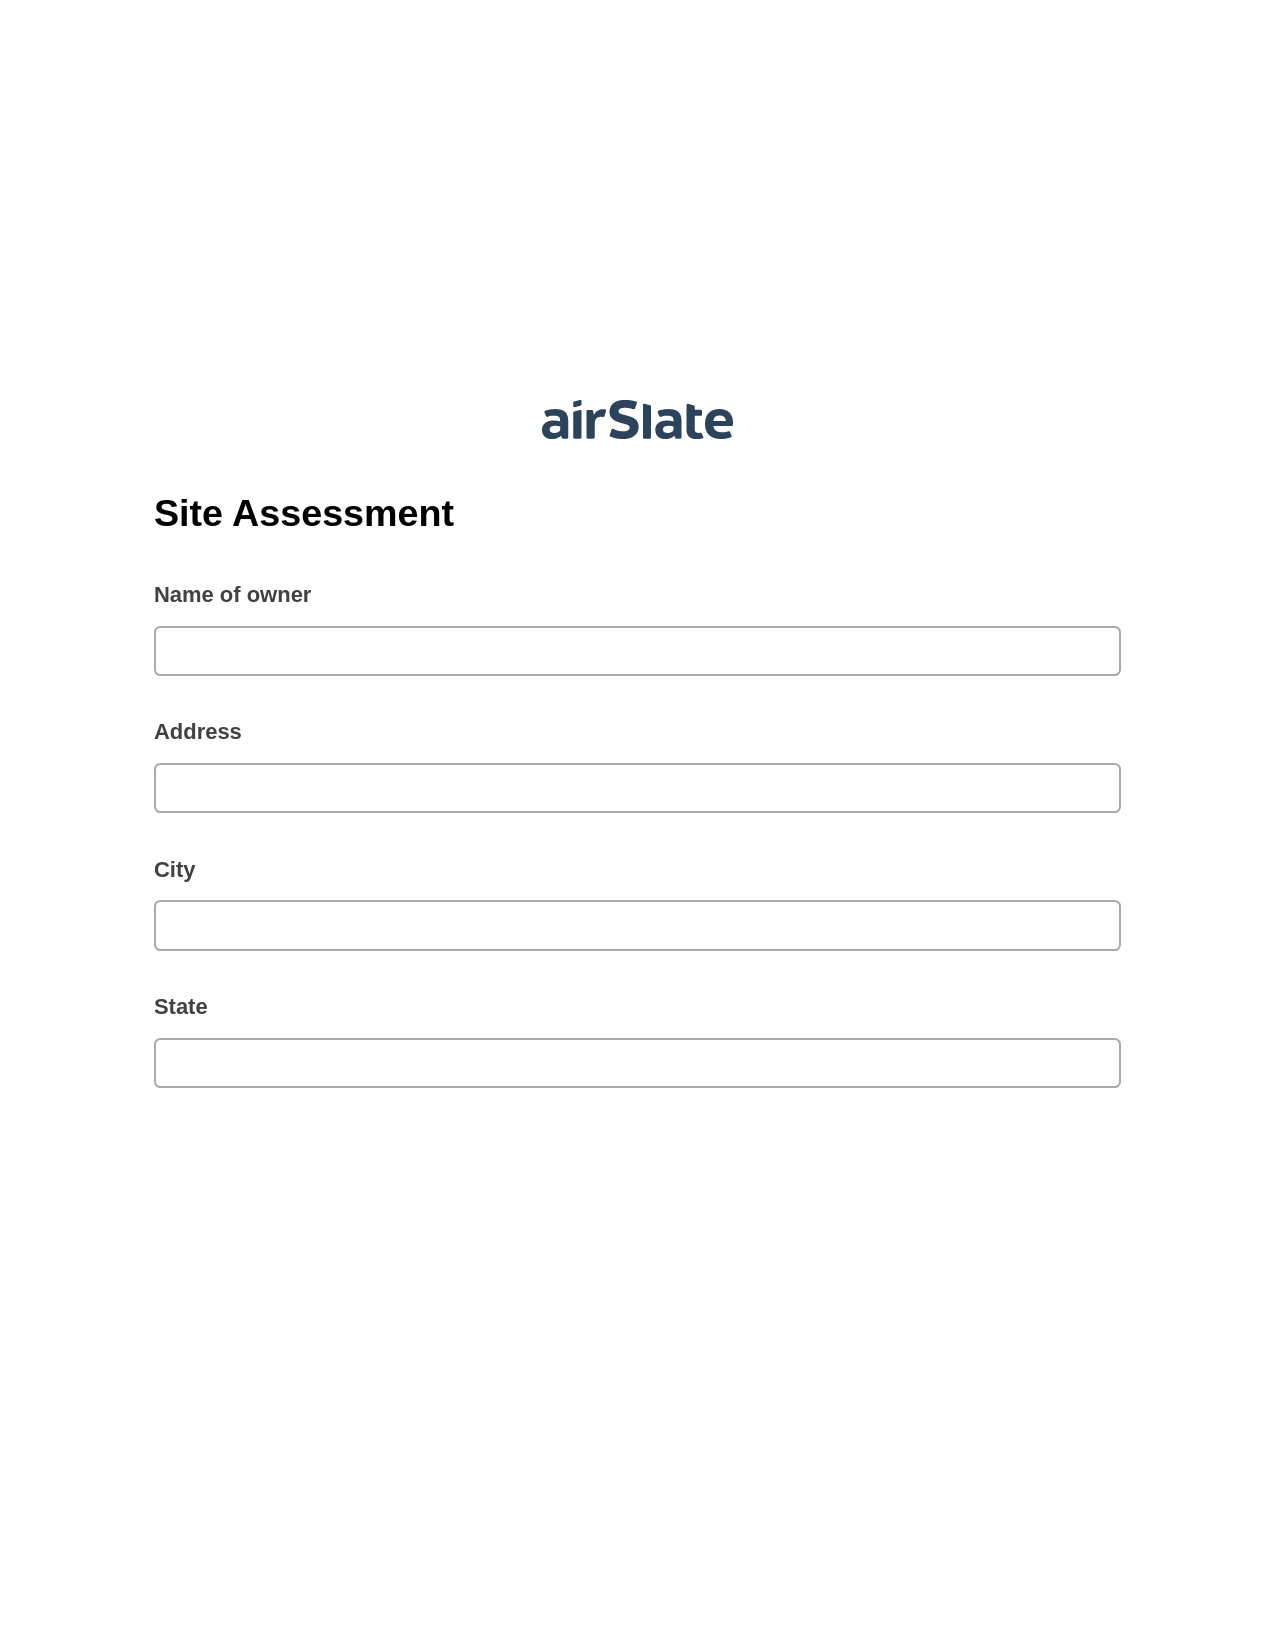 Site Assessment Pre-fill from Google Sheets Bot, Google Cloud Print Bot, Archive to SharePoint Folder Bot